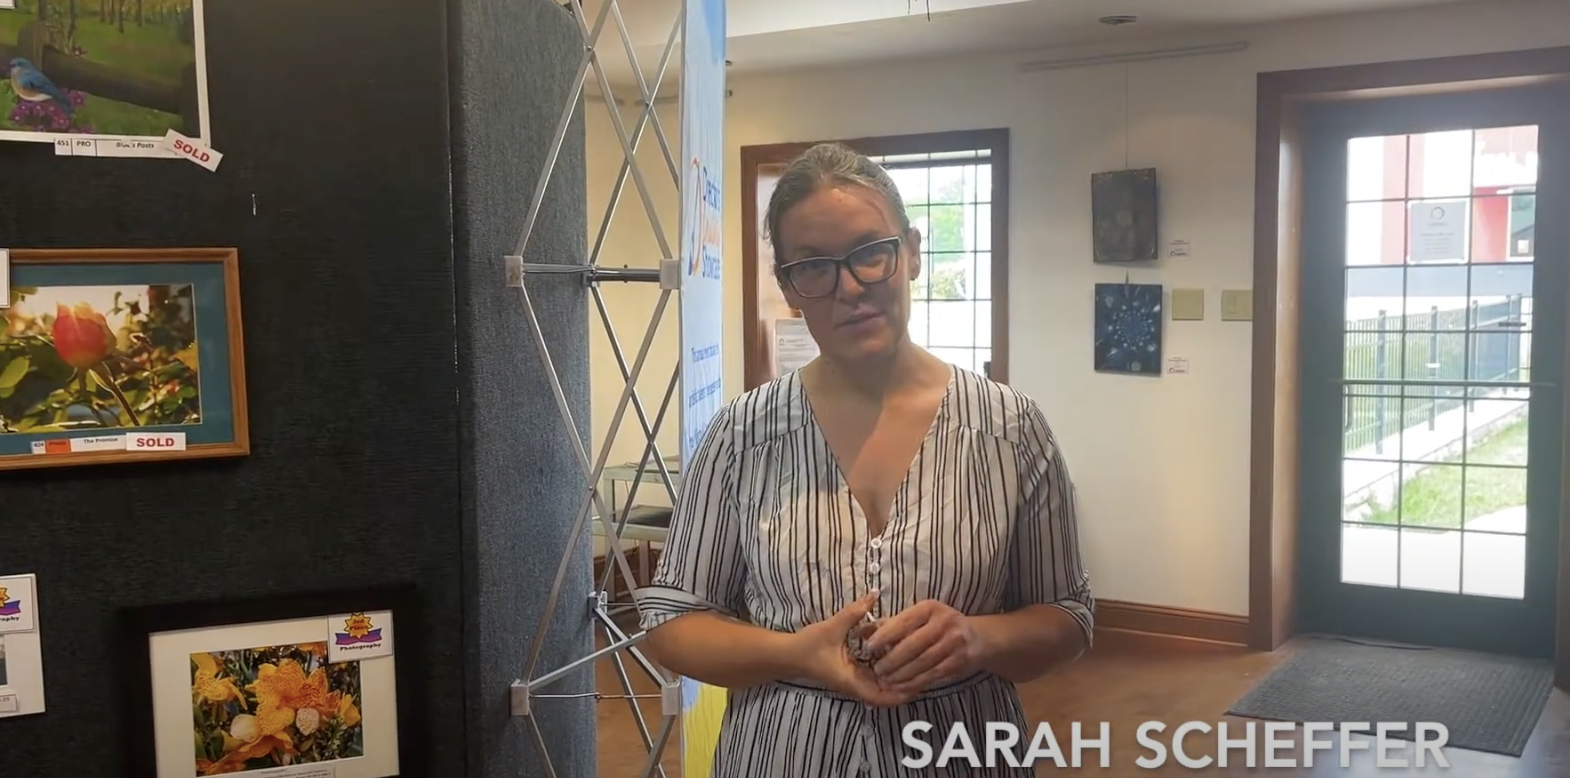 Sarah Scheffer as seen in a YouTube video on August 11, 2022 | Source: Youtube.com/@jeffersoncitynewstribune